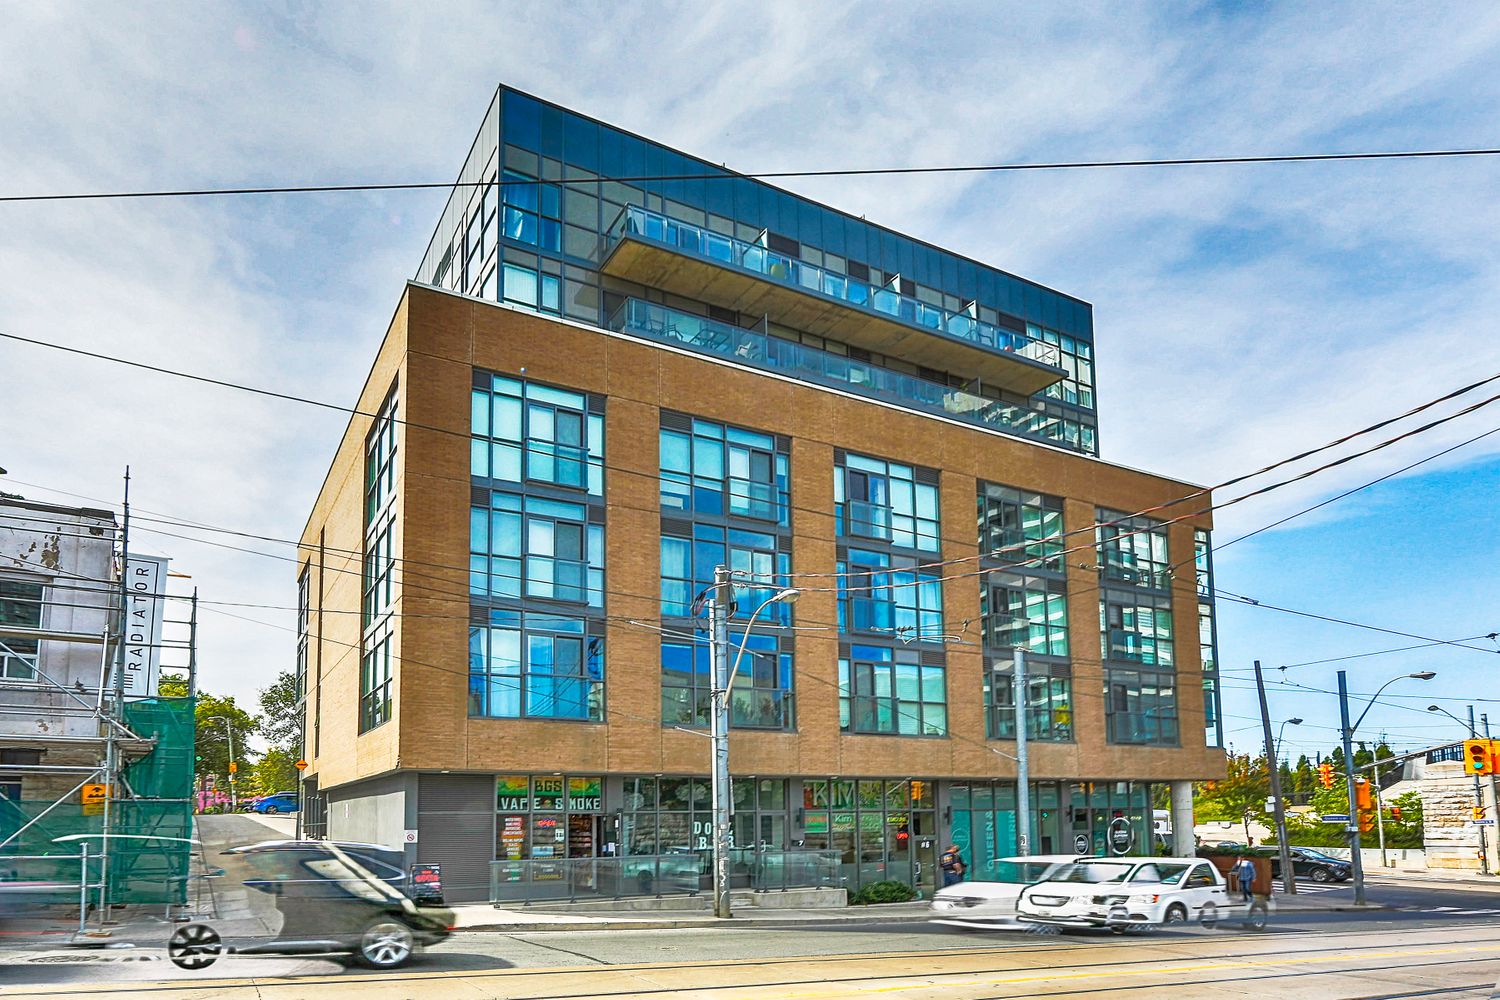 1205 Queen Street W. Q Loft is located in  West End, Toronto - image #1 of 5